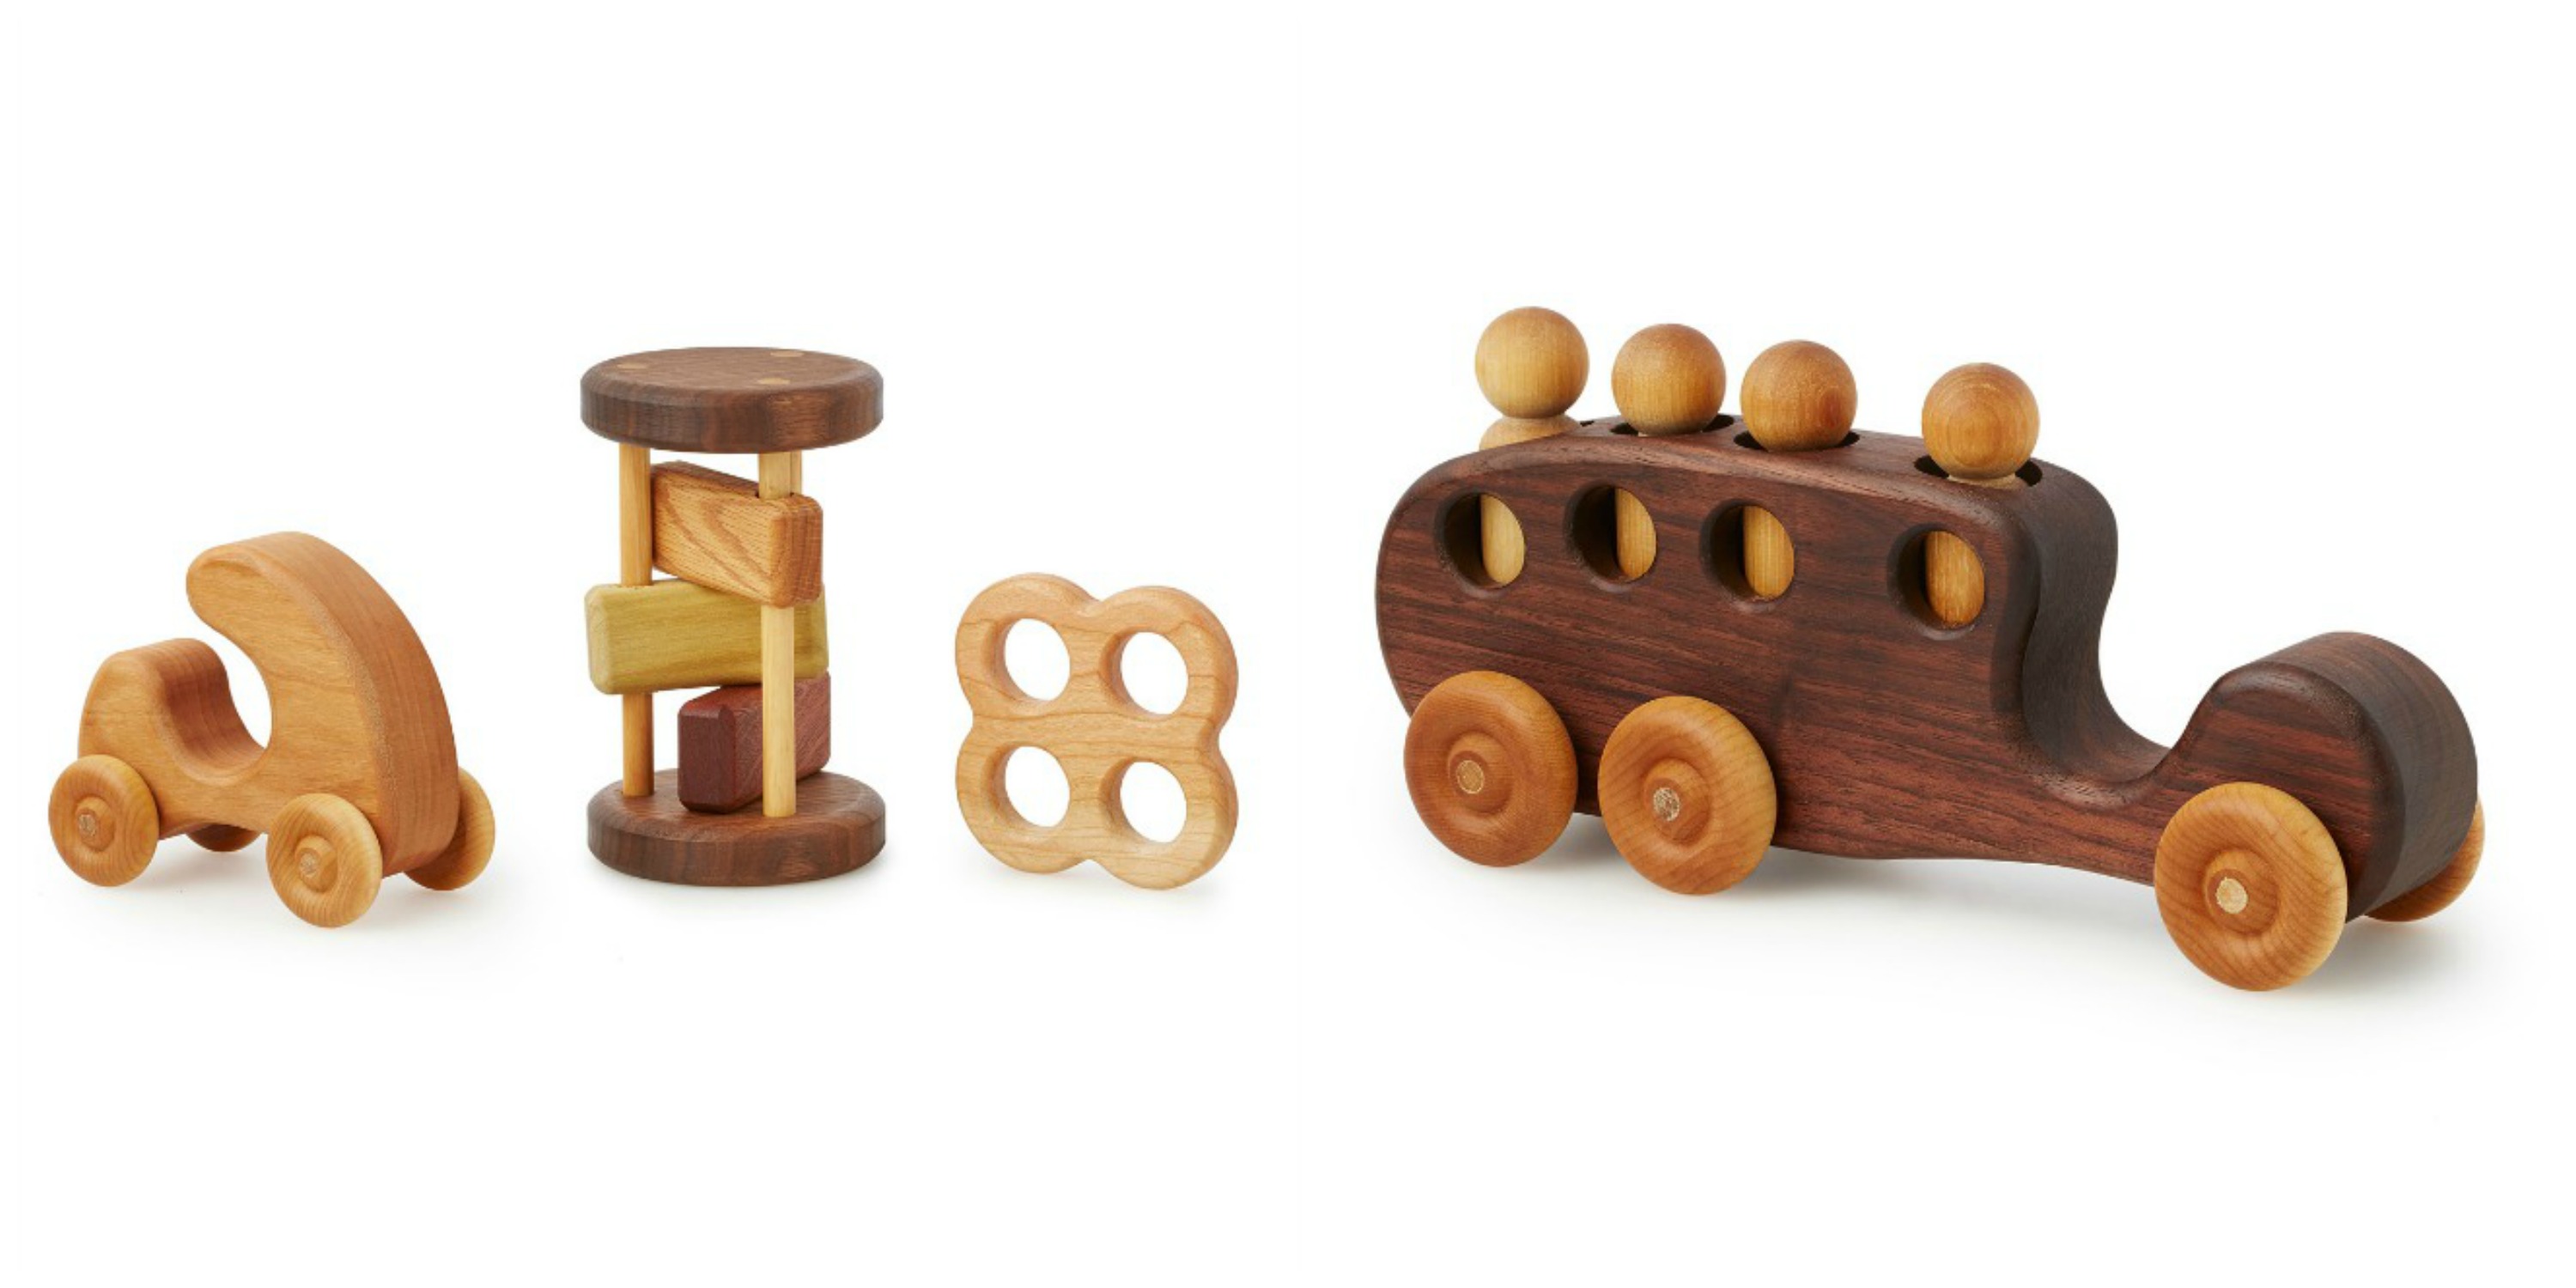 The Wooden Baby Shower Gift Set, and Wooden Bus